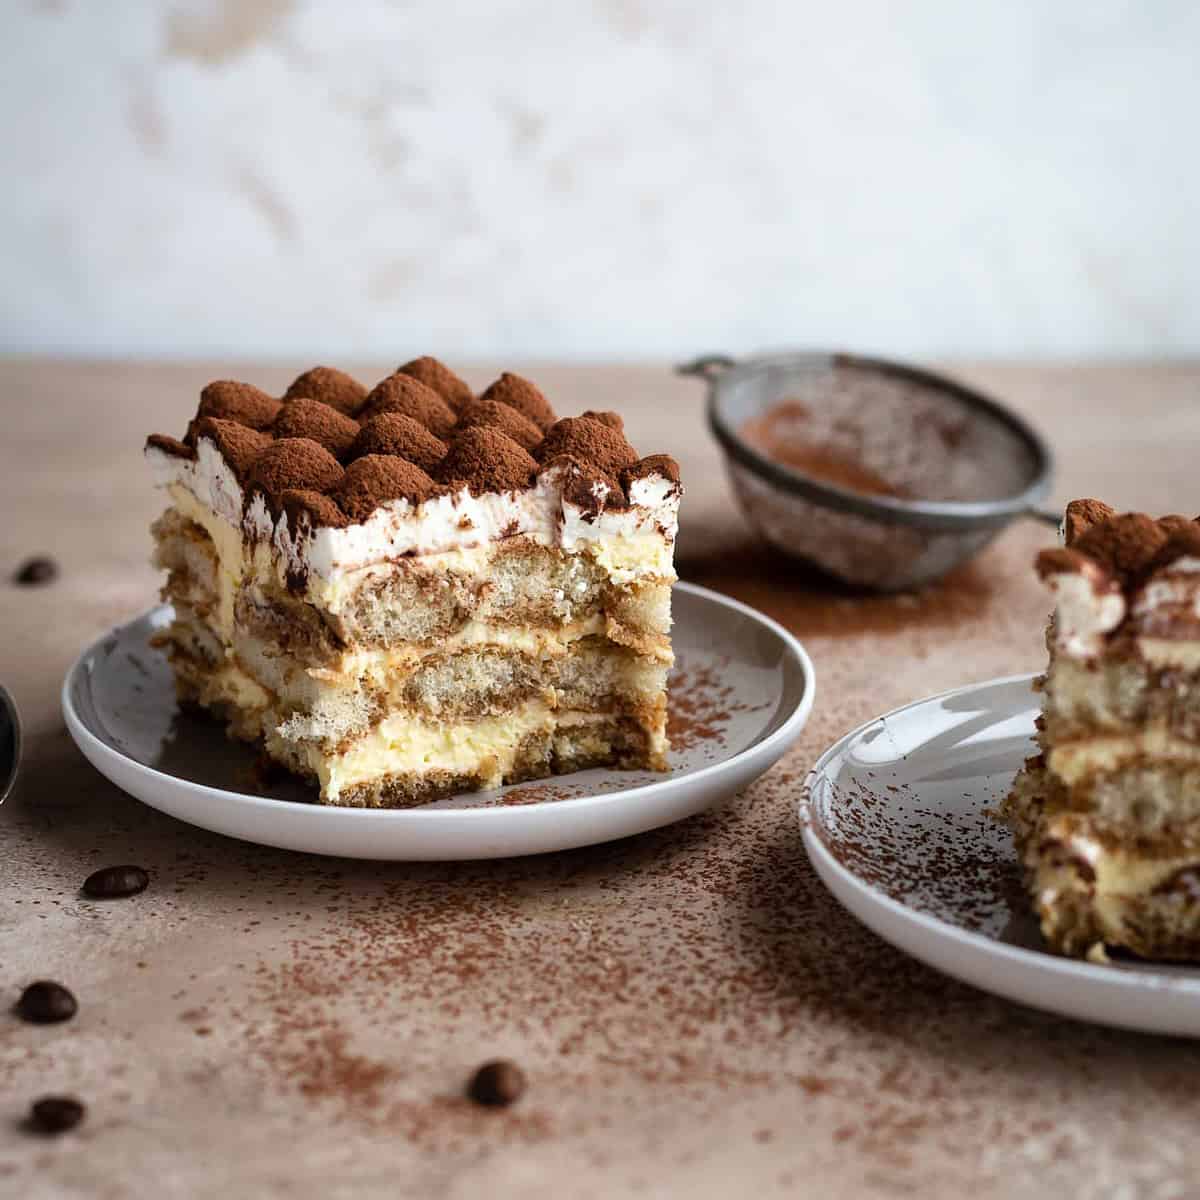 Two slices of tiramisu on two plates with a whipped cream and cocoa decoration on top